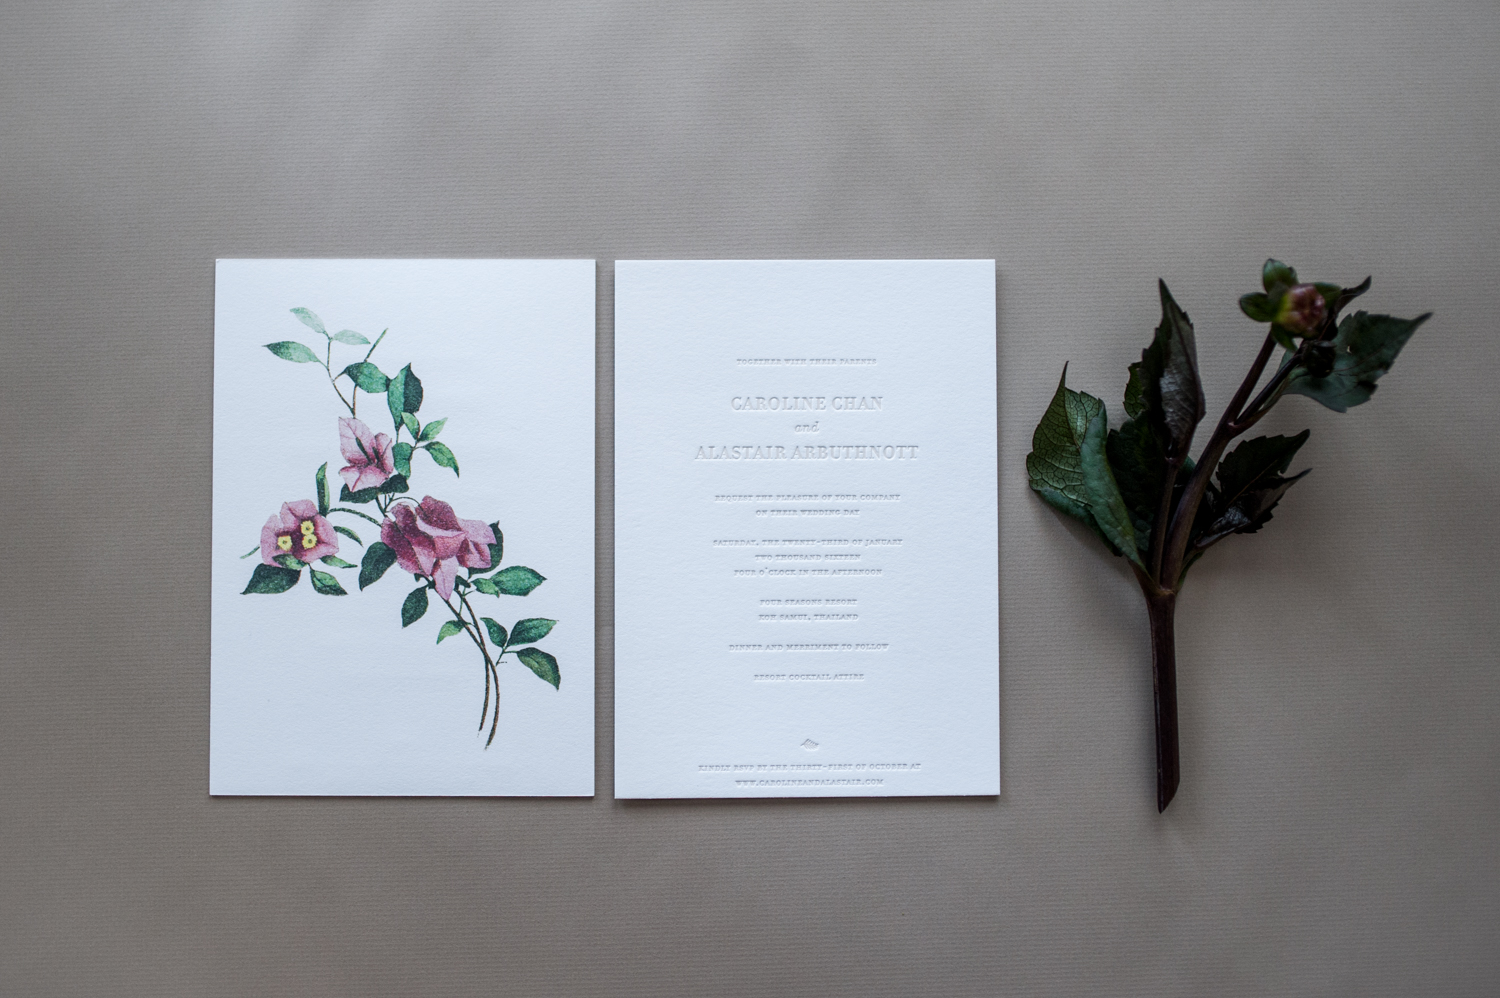 Tropical Invitation by Paper & Type, styling and photography by Emilie Anne Szabo